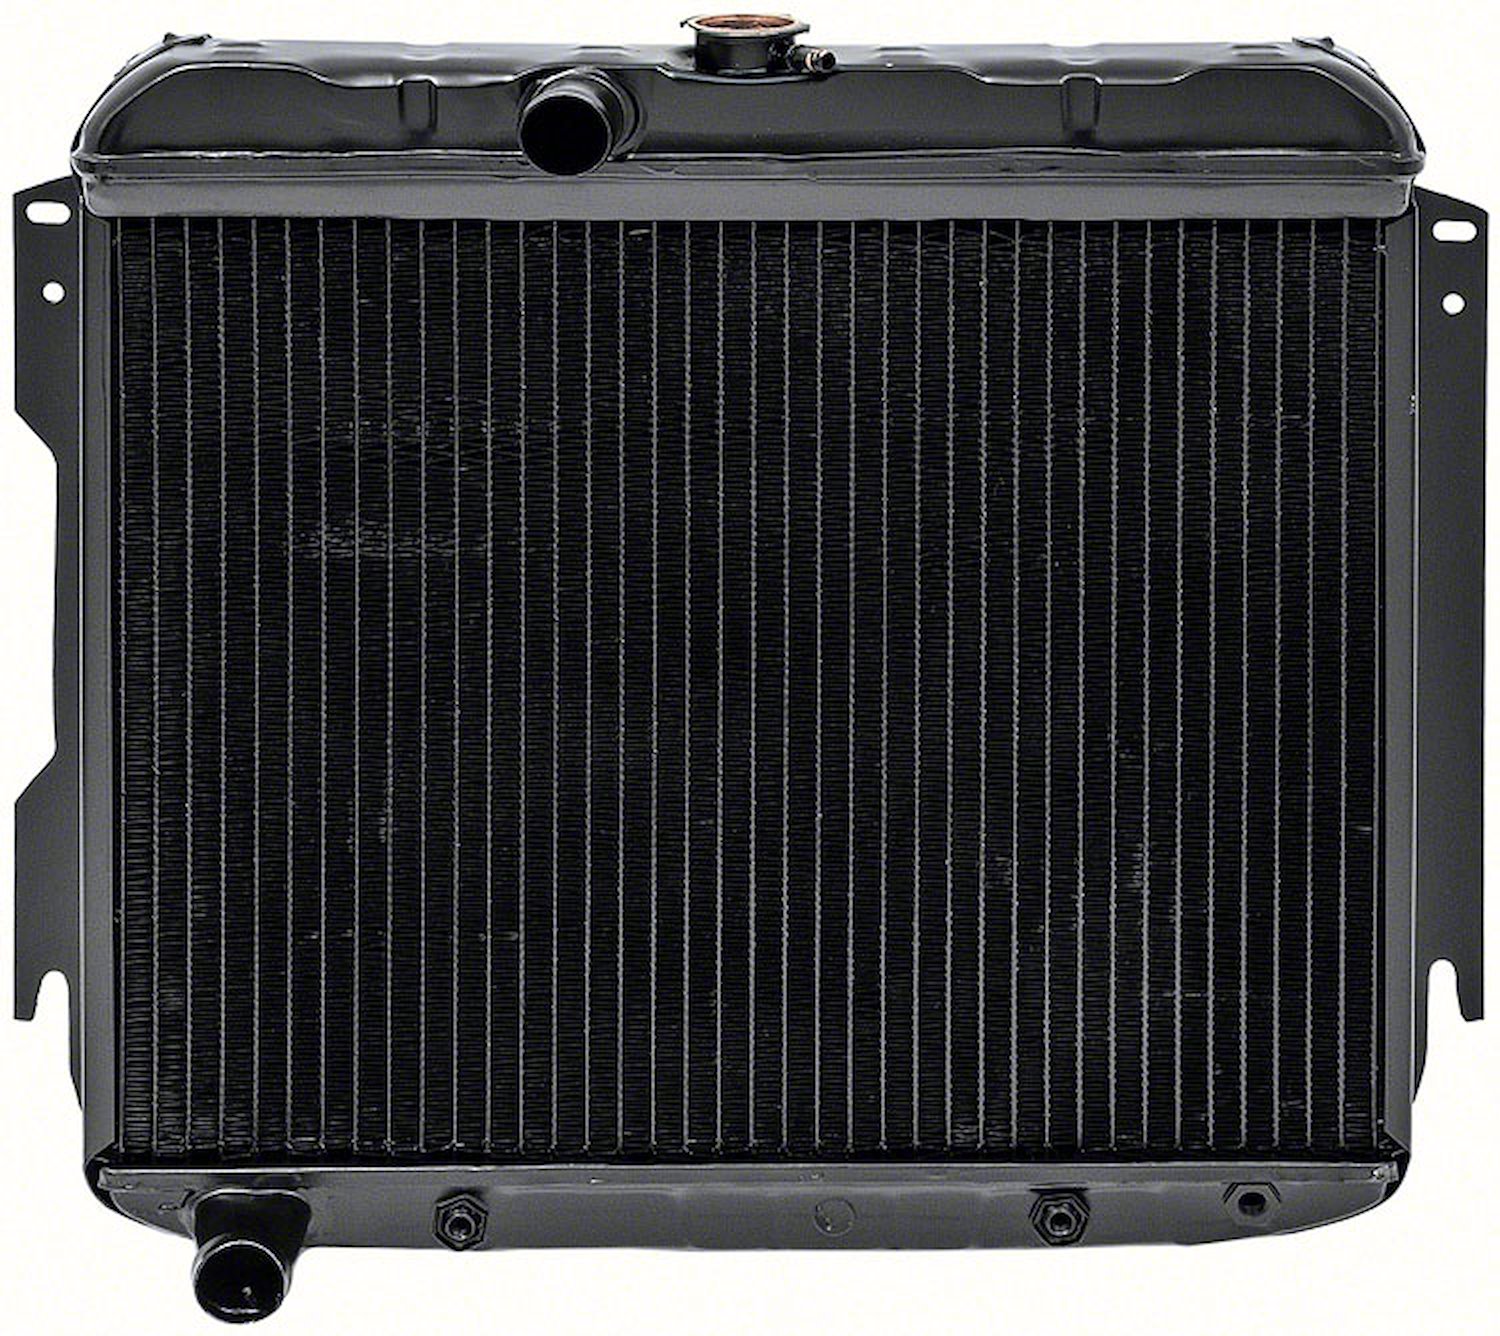 MB2363A Replacement Radiator 1963-64 Dodge B-Body V8 318Ci With Automatic Trans 3 Row